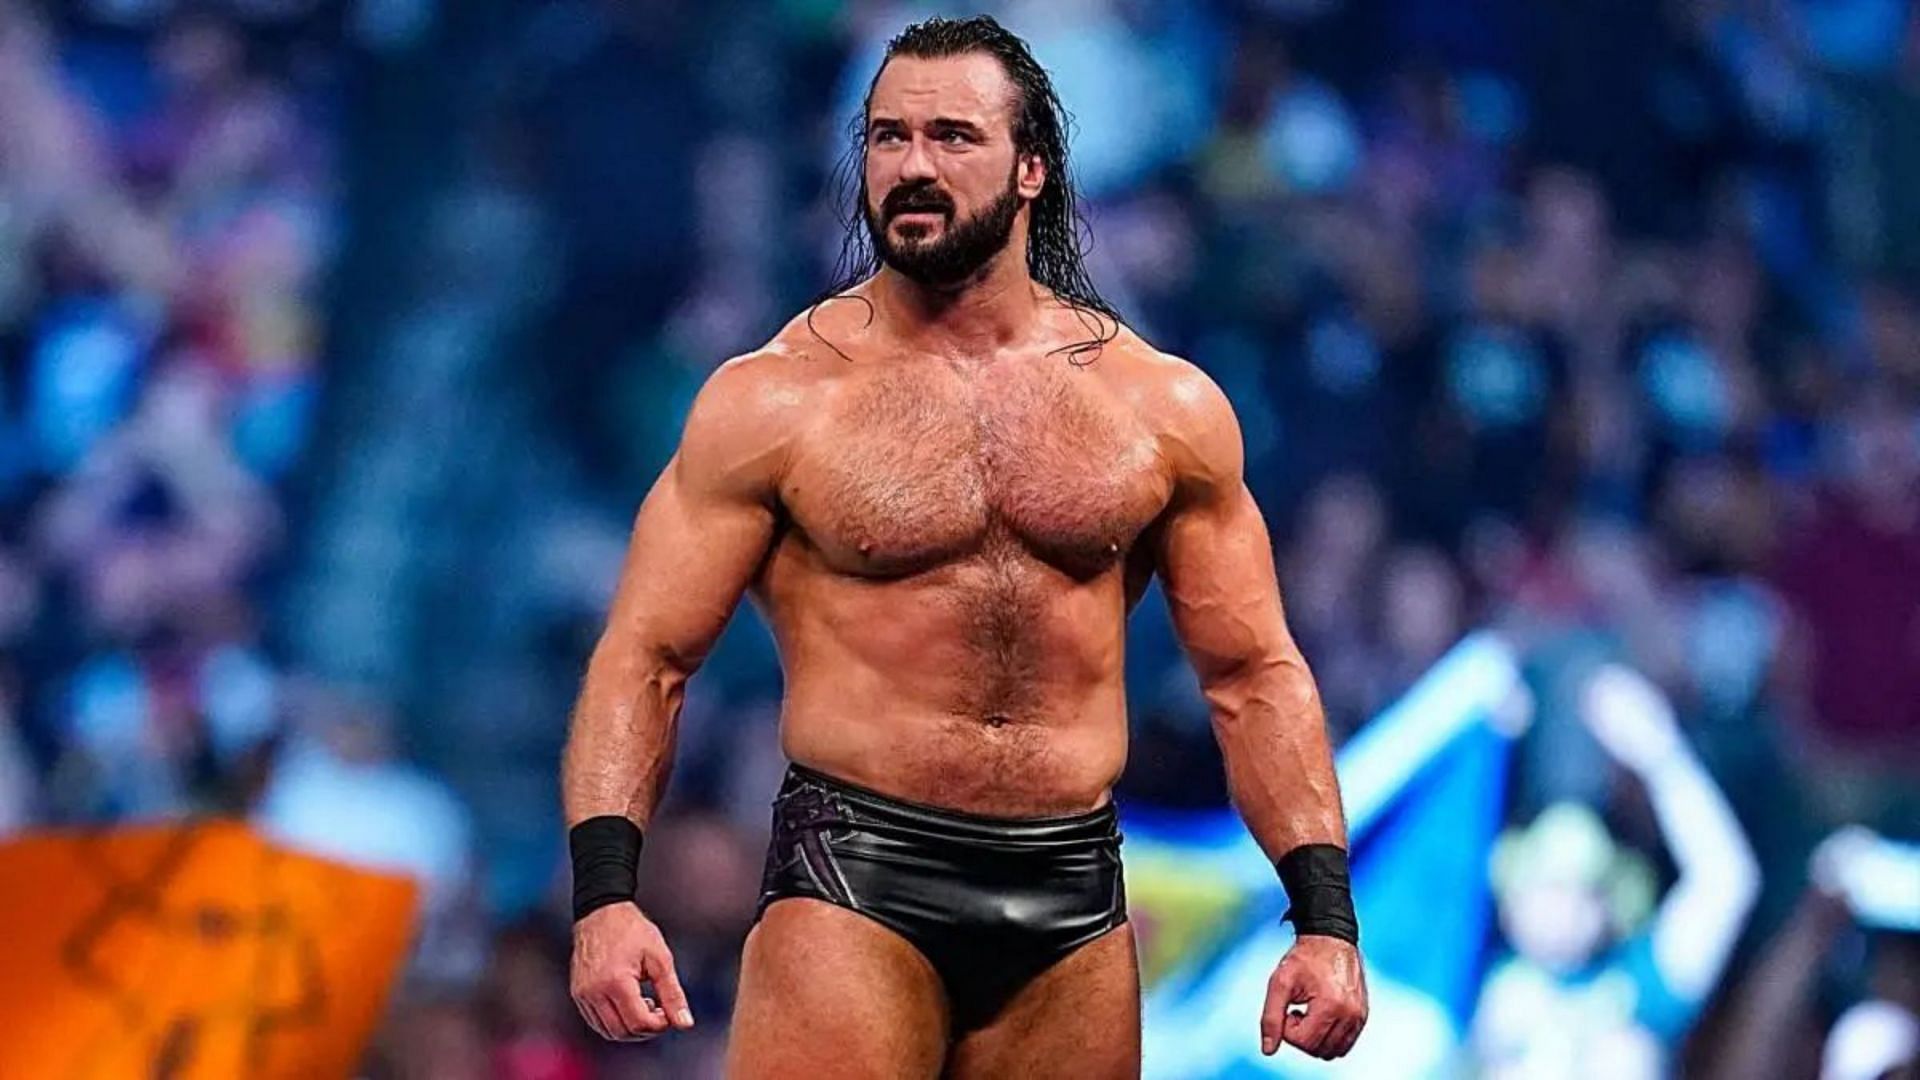 Drew McIntyre unintentionally recreated Shawn Michaels&#039; racy photo in 2020